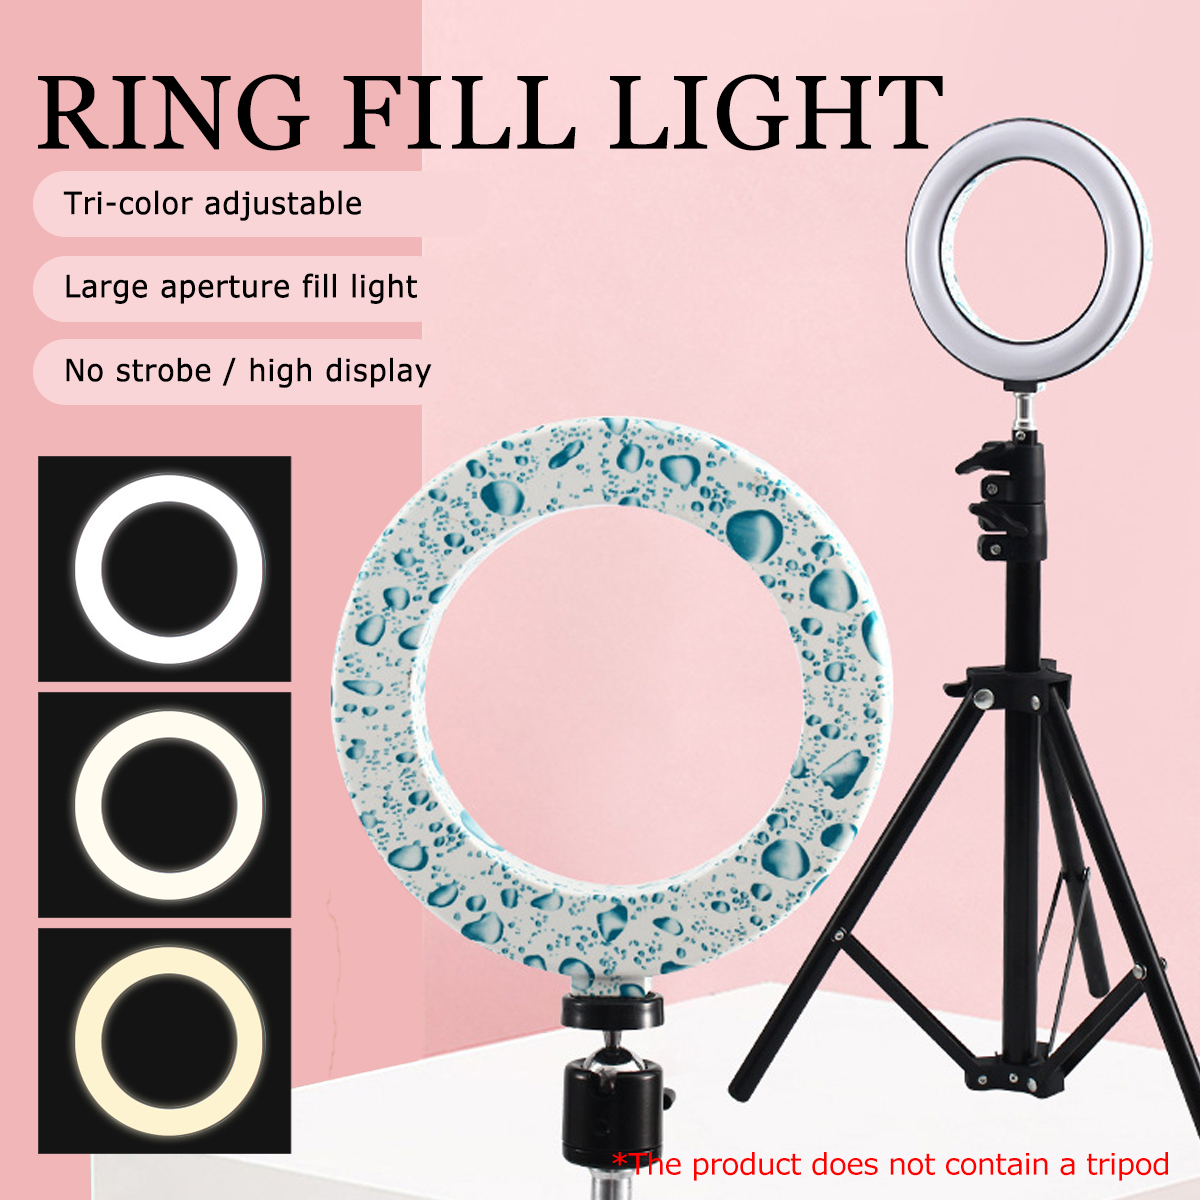 6-inch-LED-Ring-Light-Fill-Light-For-Makeup-Streaming-Selfie-Beauty-Photography-B-Makeup-Mirror-Ligh-1635732-1